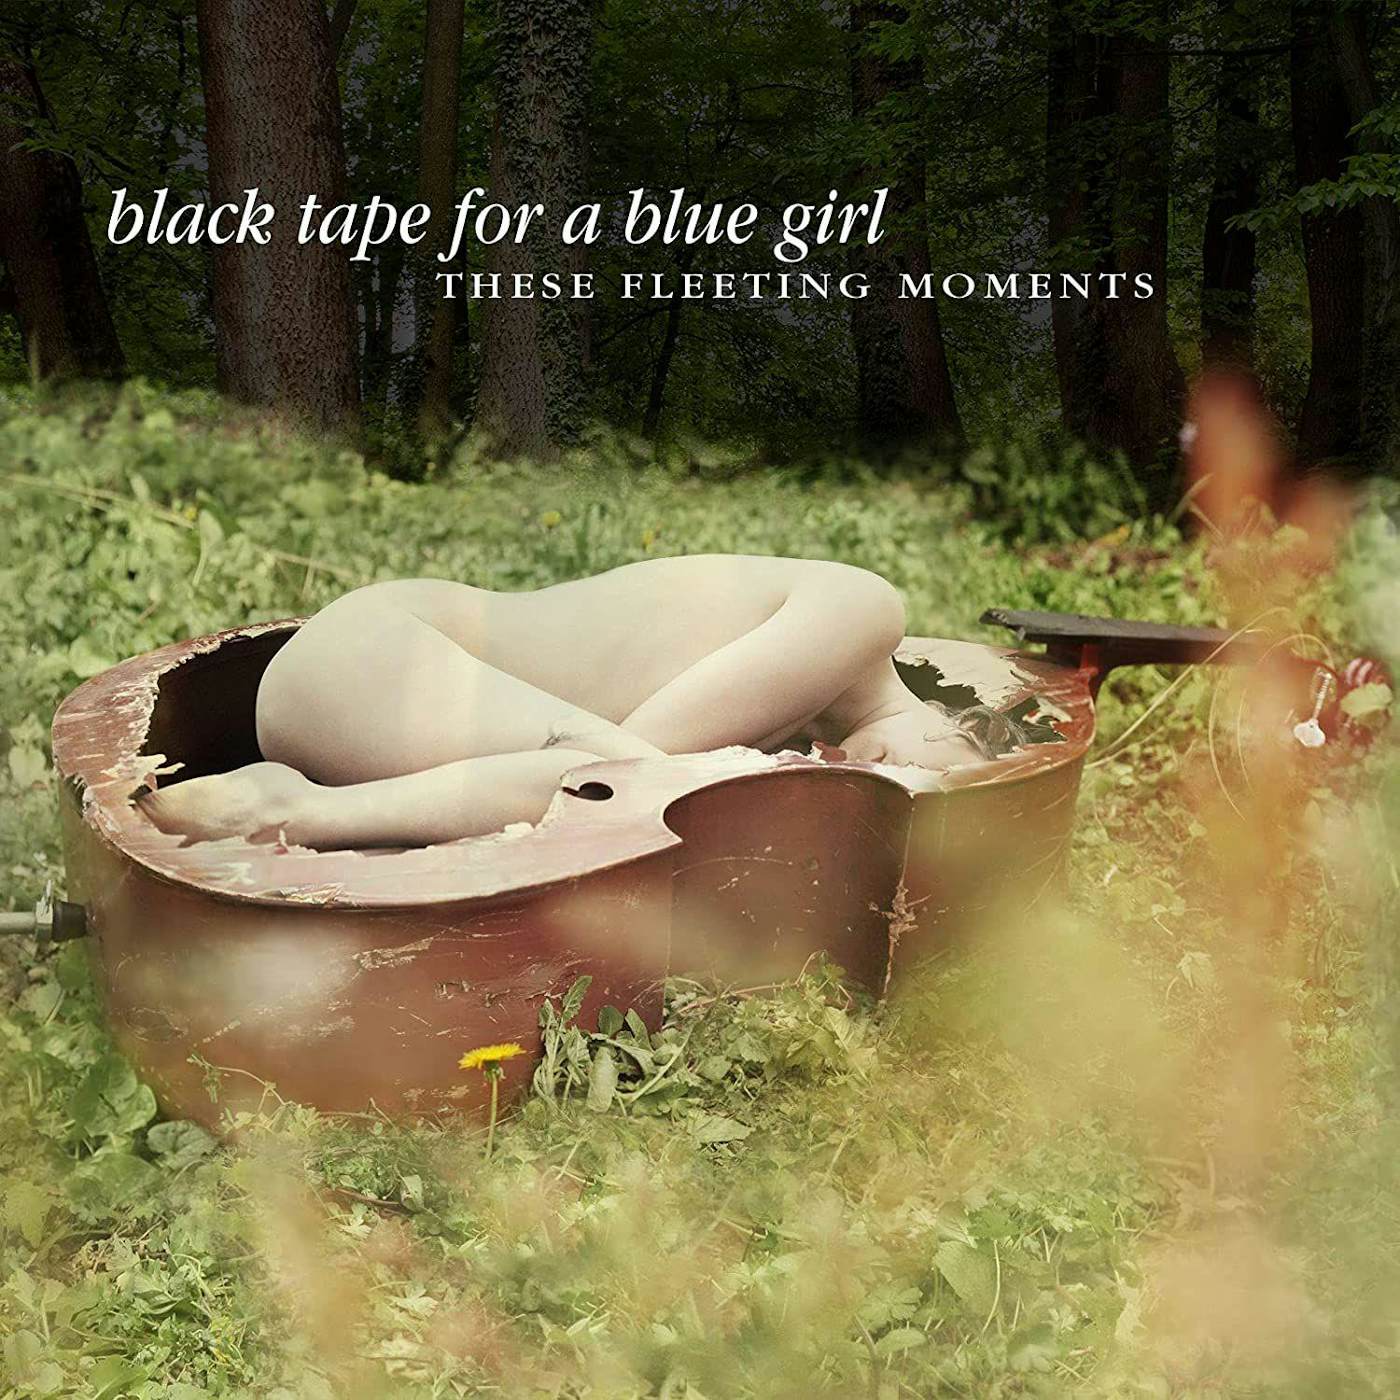 Black Tape For A Blue Girl These Fleeting Moments (150g/2LP/Greenish With Black Swirl/Booklet/DL Card) Vinyl Record